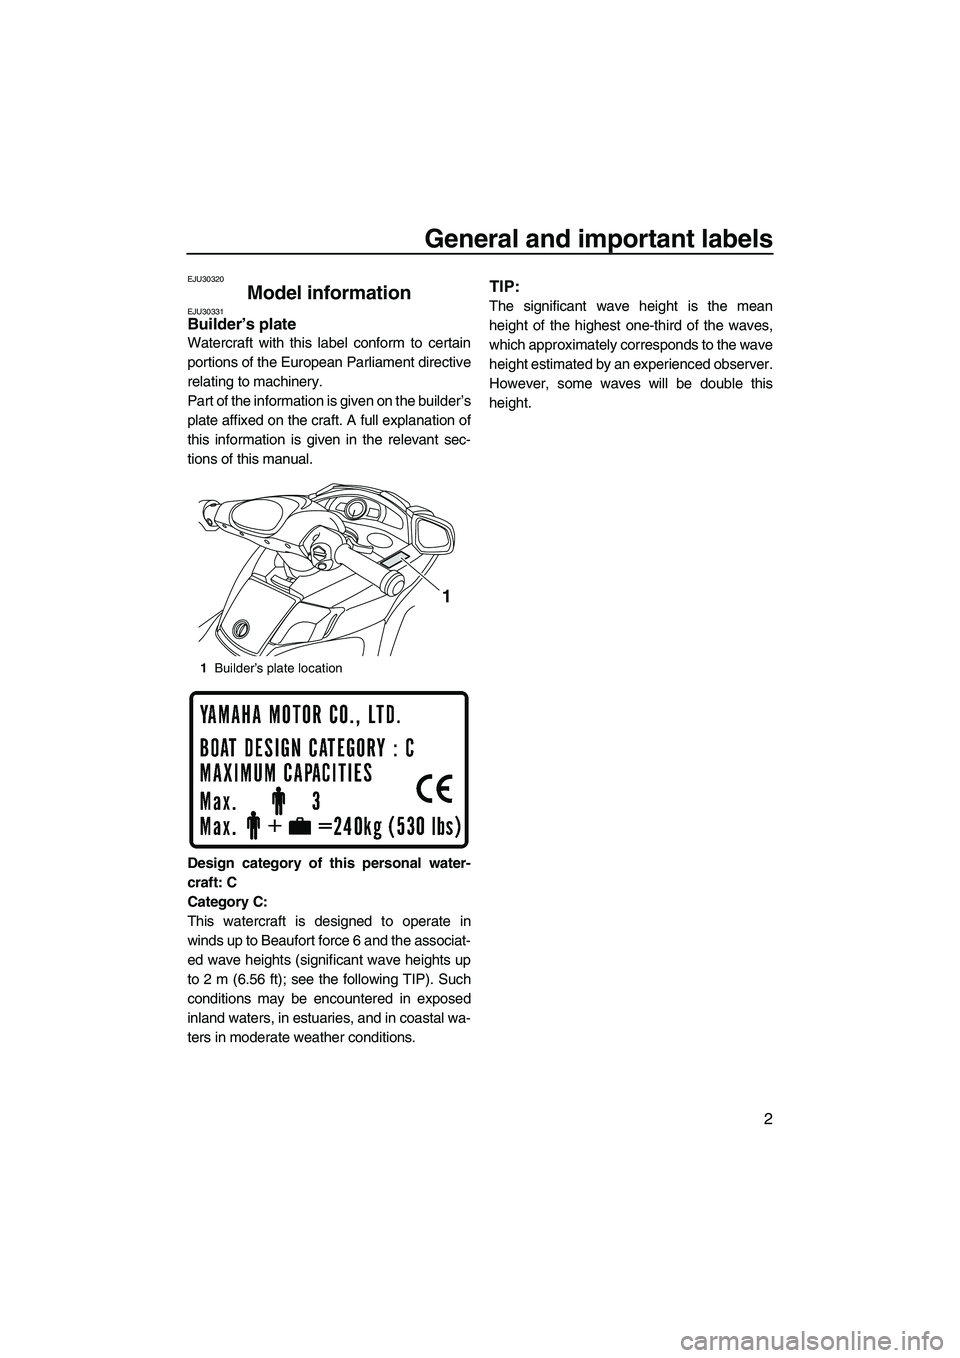 YAMAHA SVHO 2009  Owners Manual General and important labels
2
EJU30320
Model information EJU30331Builder’s plate 
Watercraft with this label conform to certain
portions of the European Parliament directive
relating to machinery.
